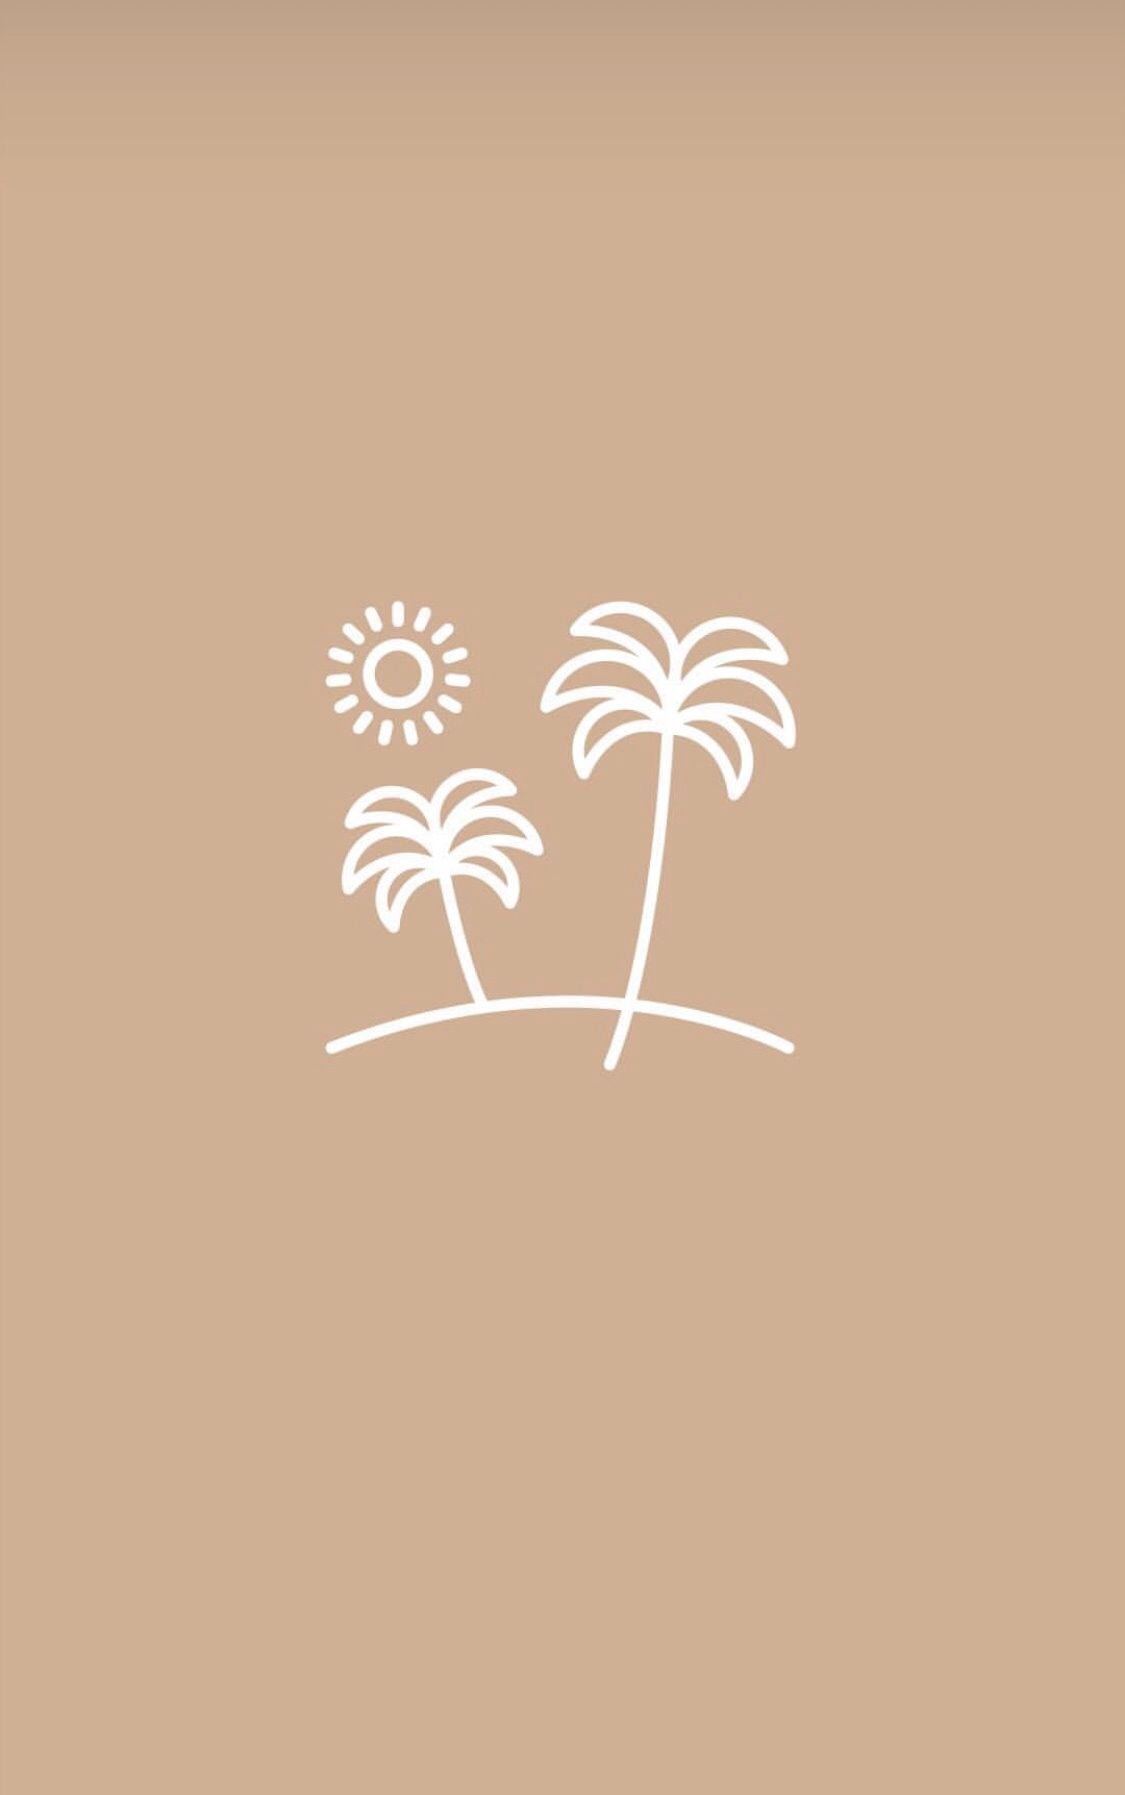 Aesthetic wallpaper phone background with palm trees and the sun - Apple Watch